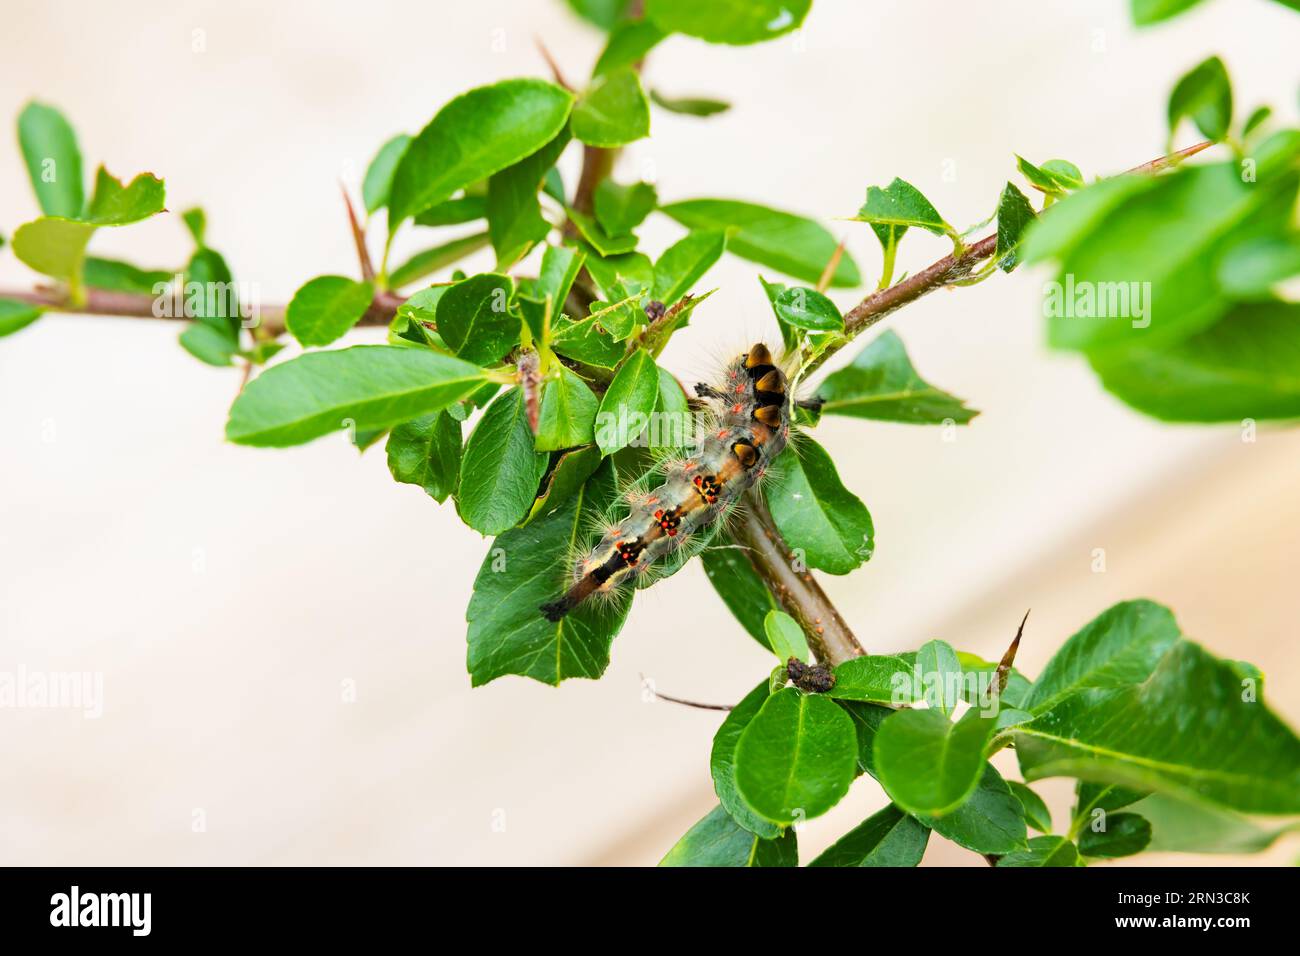 Rusty Tussock Moth,Orgyia antiqua, caterpillar on a pyracantha branch and leaves. Stock Photo